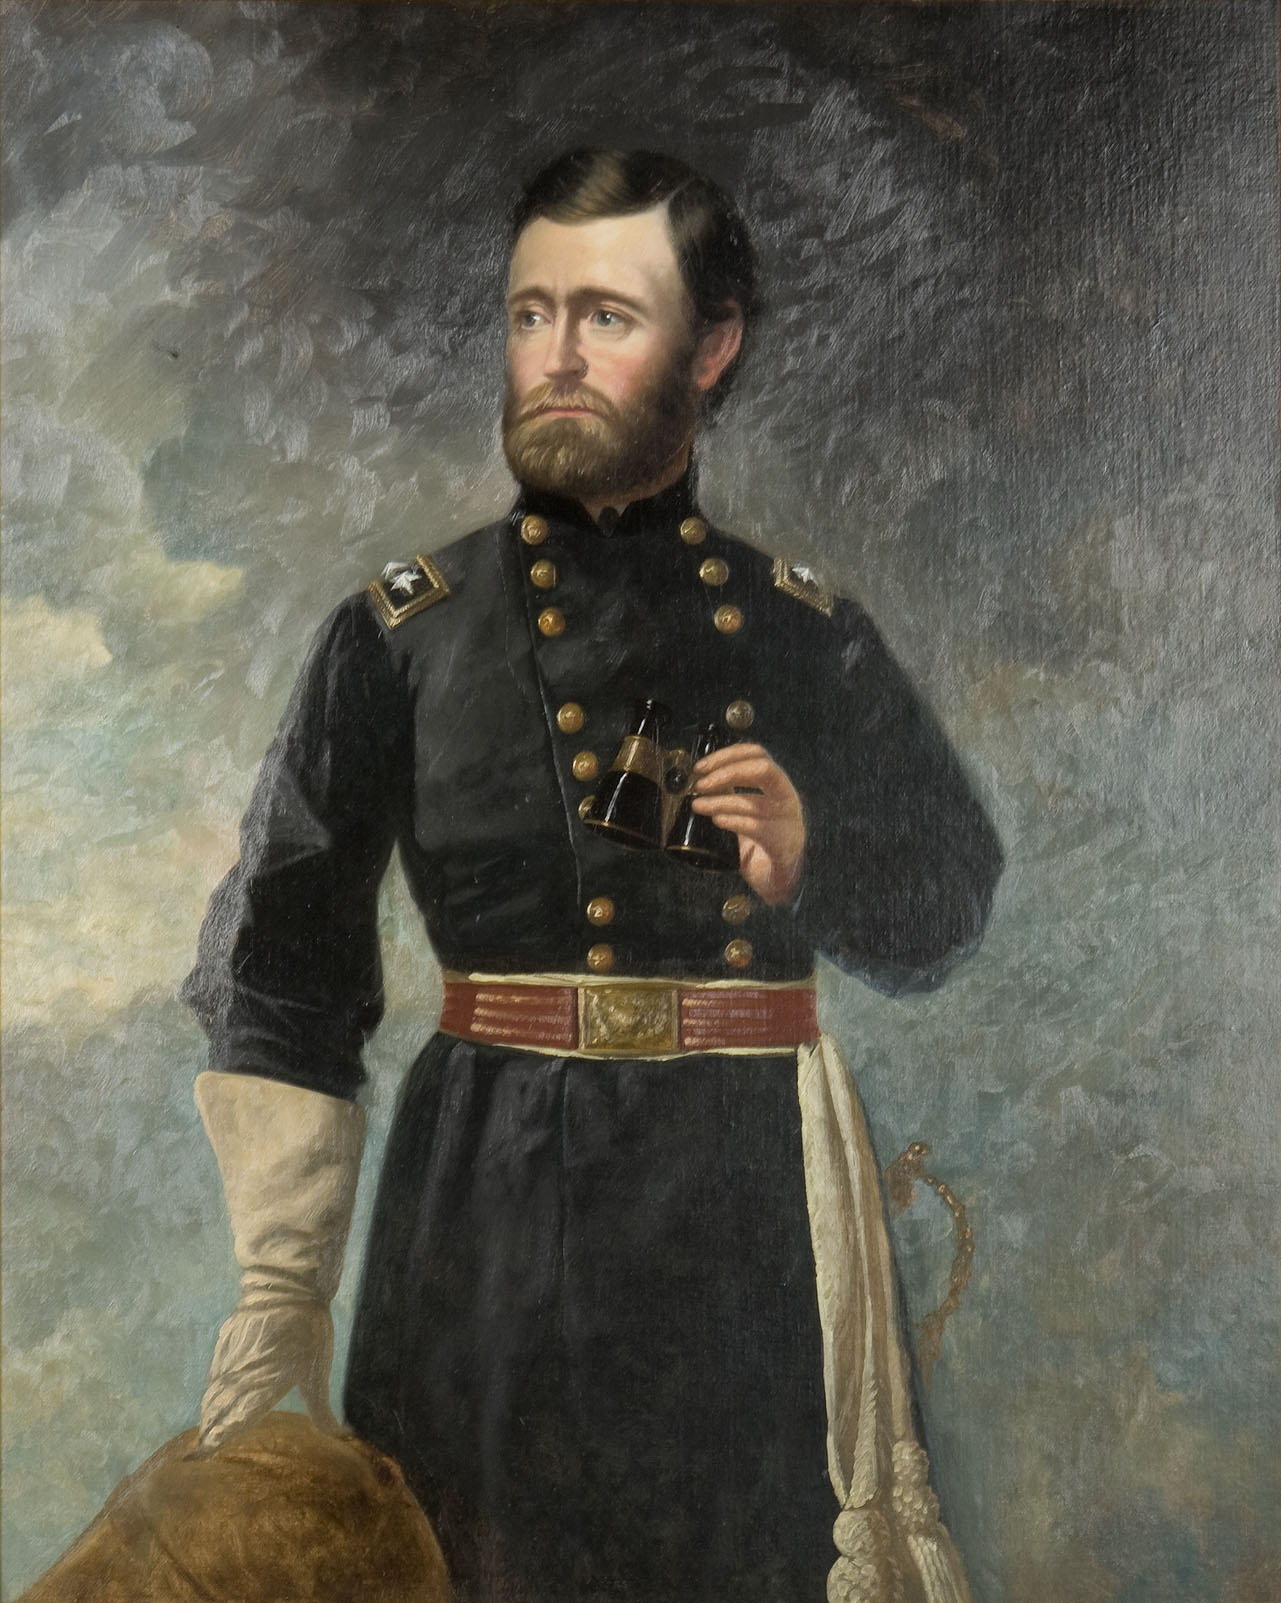 John Antrobus, General Ulysses S. Grant, 1863, oil on canvas, 50 x 40.5 inches (Chicago Public Library)